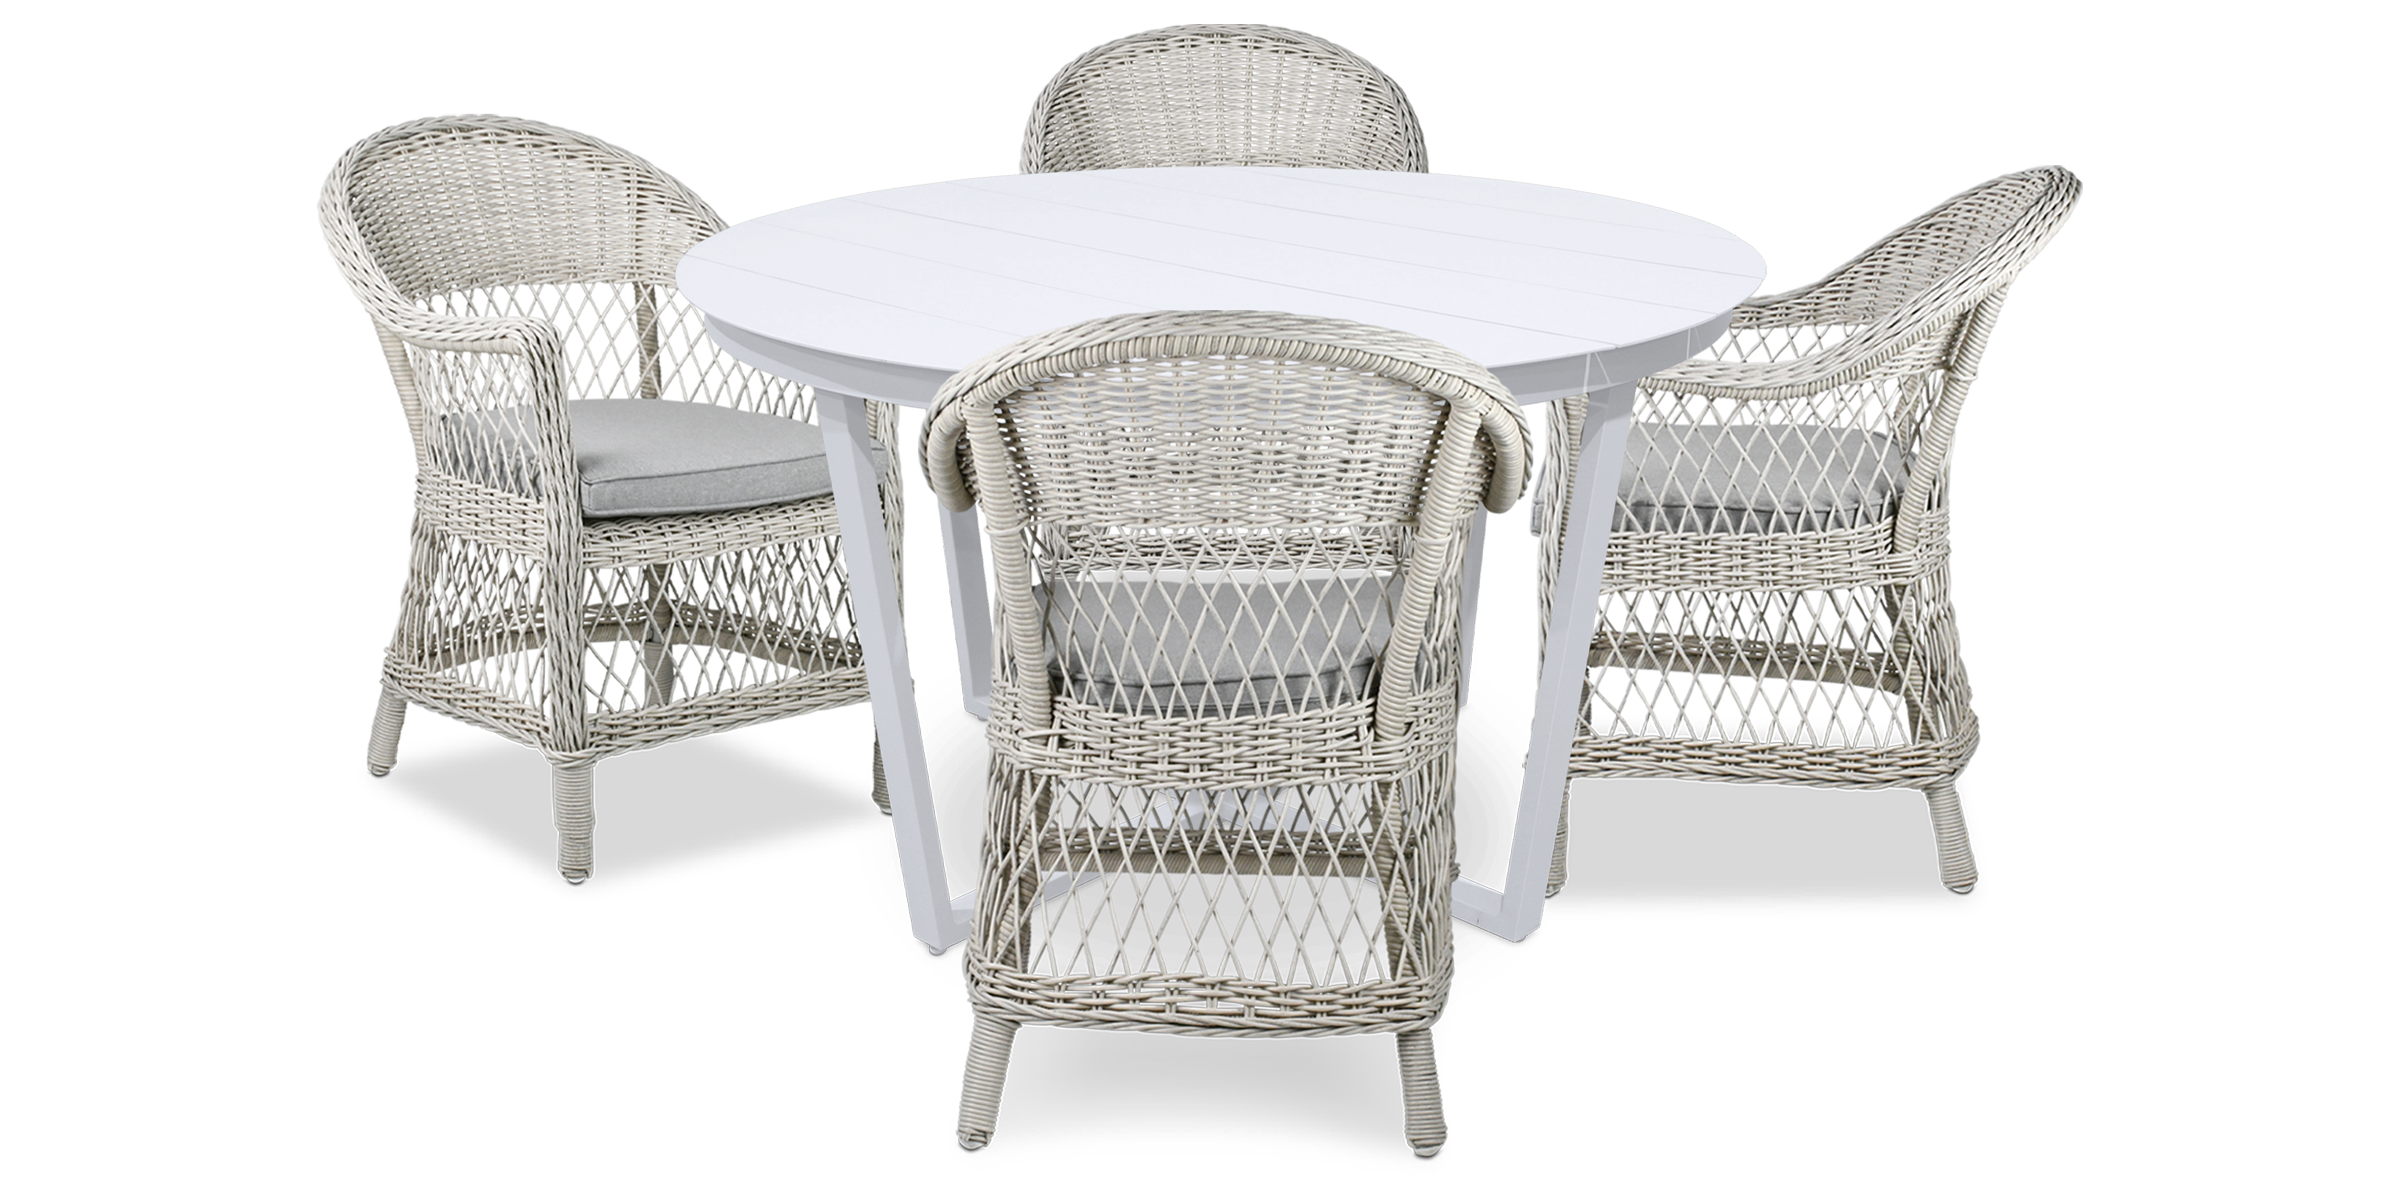 Amalfi Round 5 Piece Outdoor Setting with Wicker Chairs